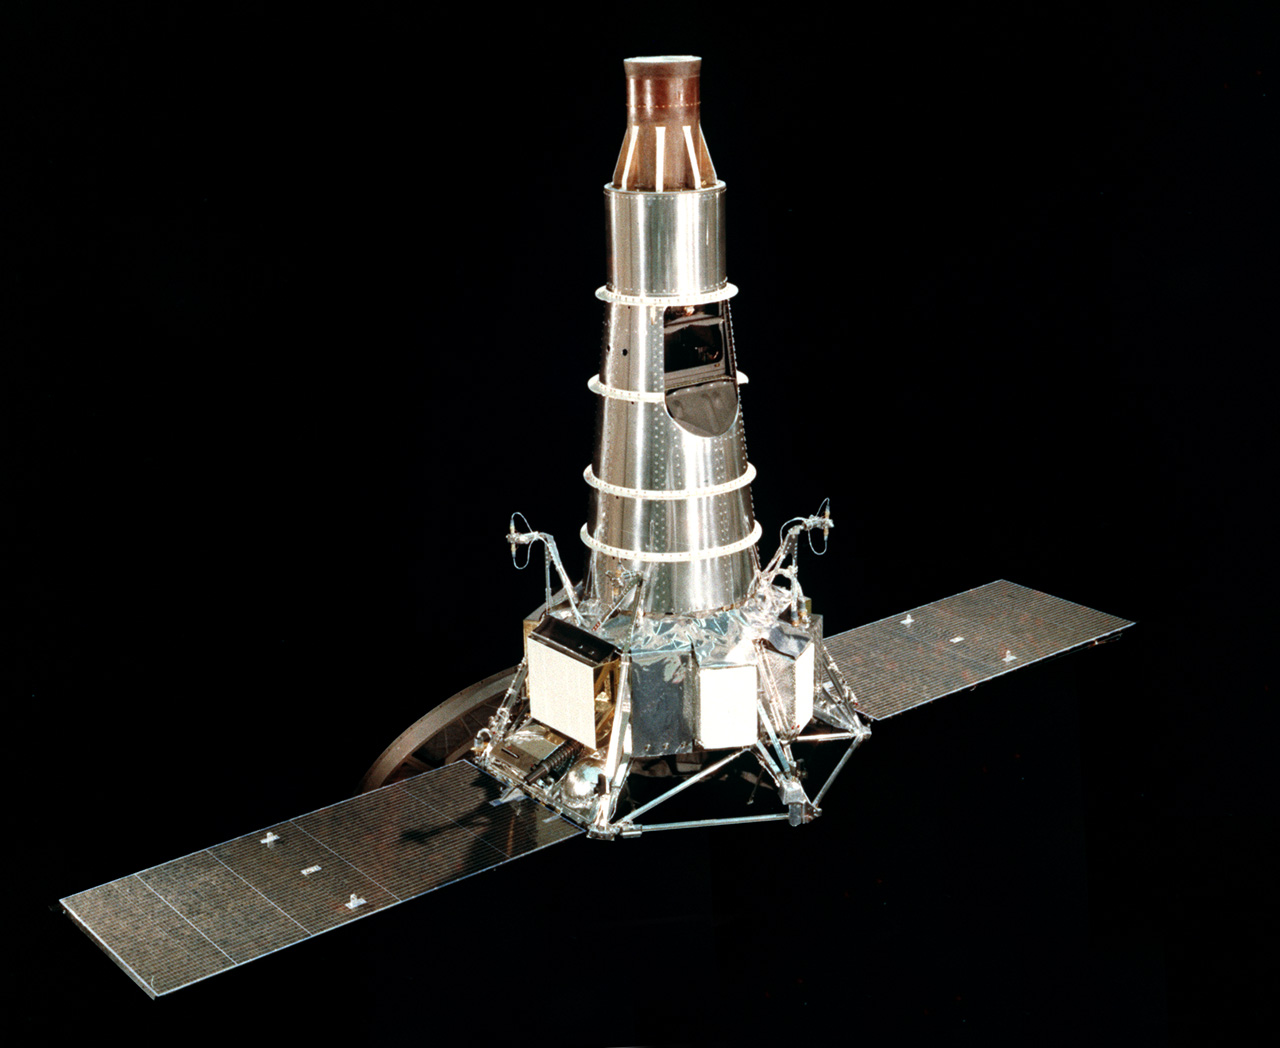 Photo of spacecraft against a black background.